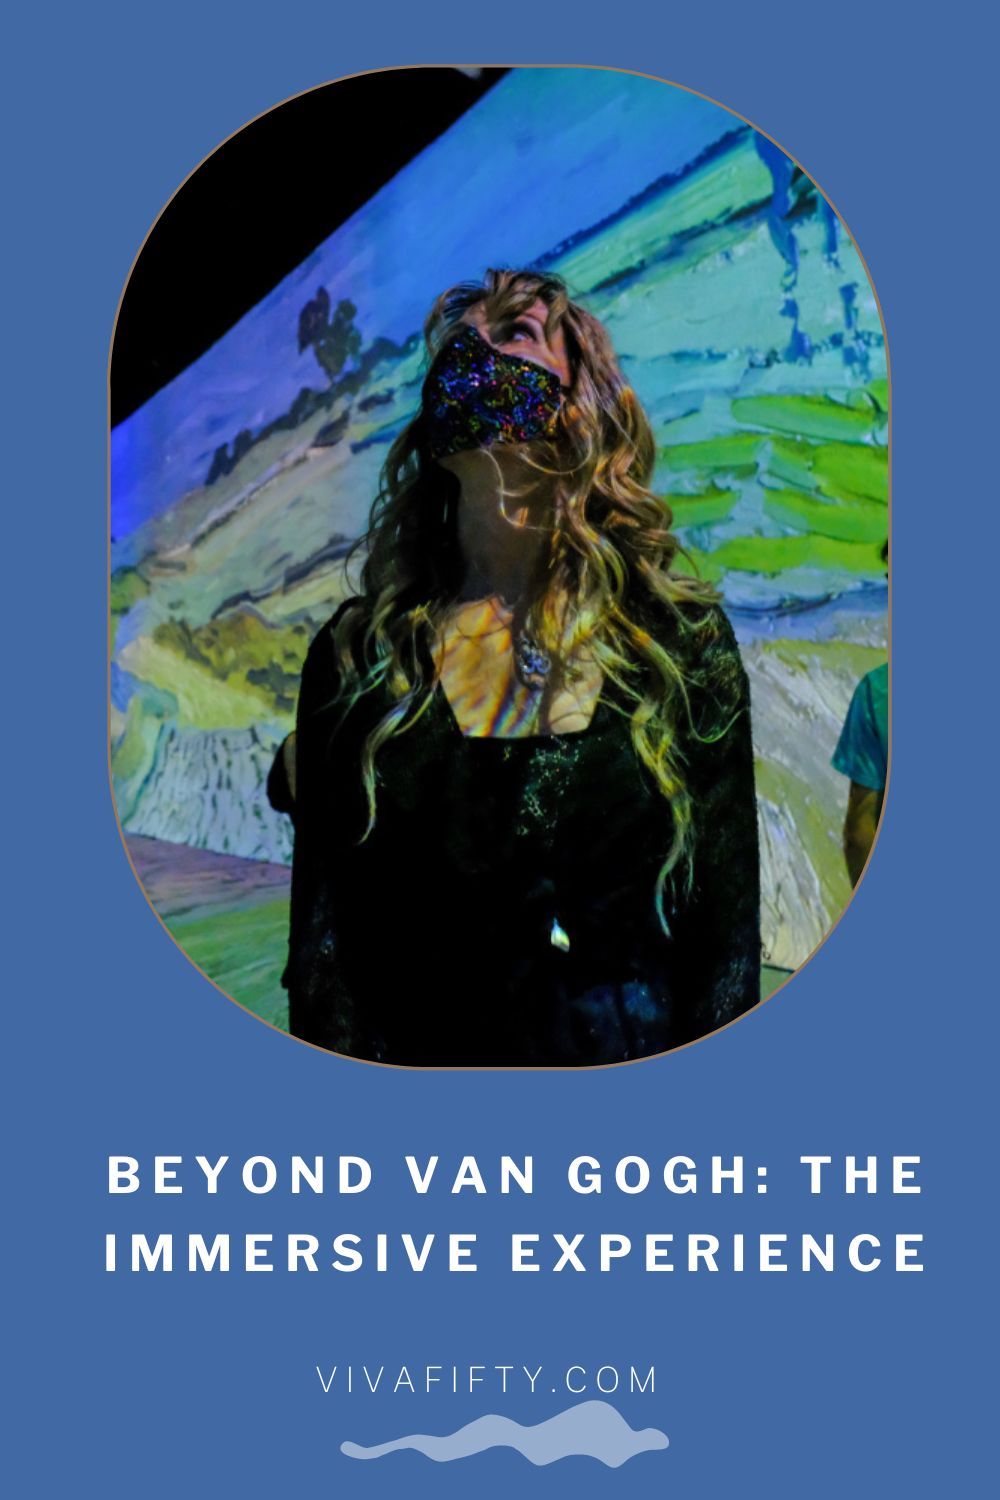 If you still haven’t seen Beyond Van Gogh, The Immersive Experience, we hope to encourage you to give it a visit.